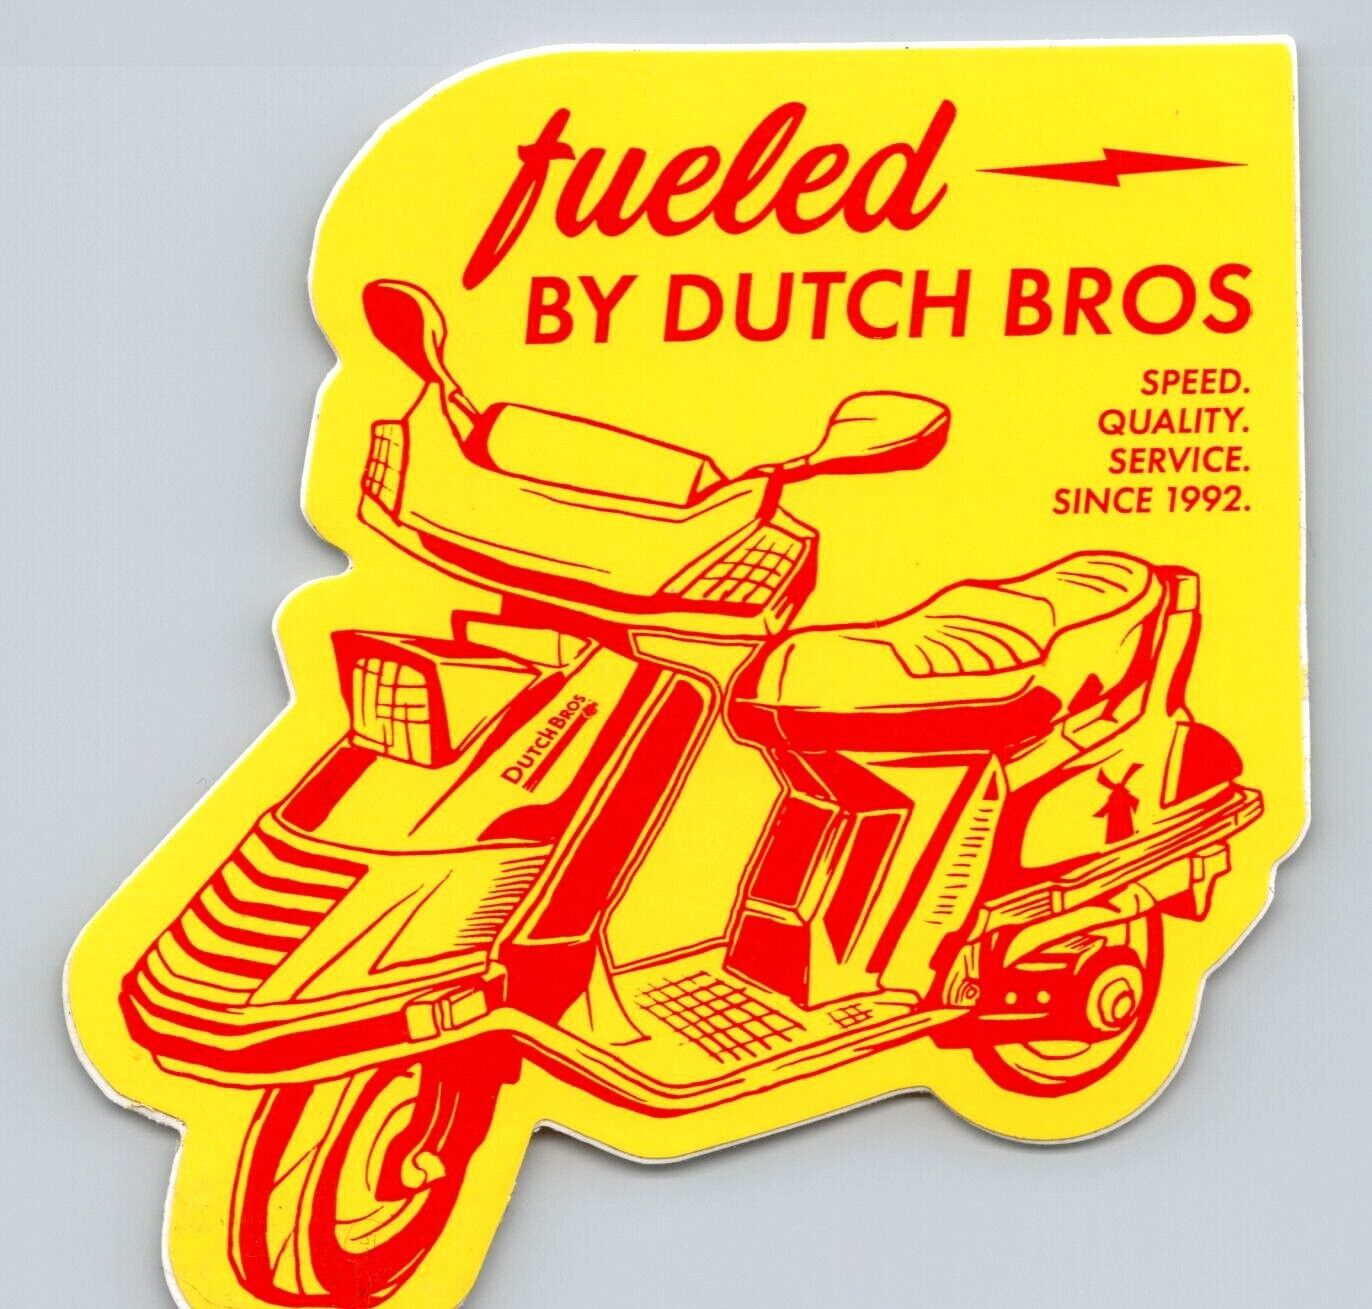 Fueled by Scooter Moped Motorcycle Dutch Bros Coffee Sticker Decal 2020 July